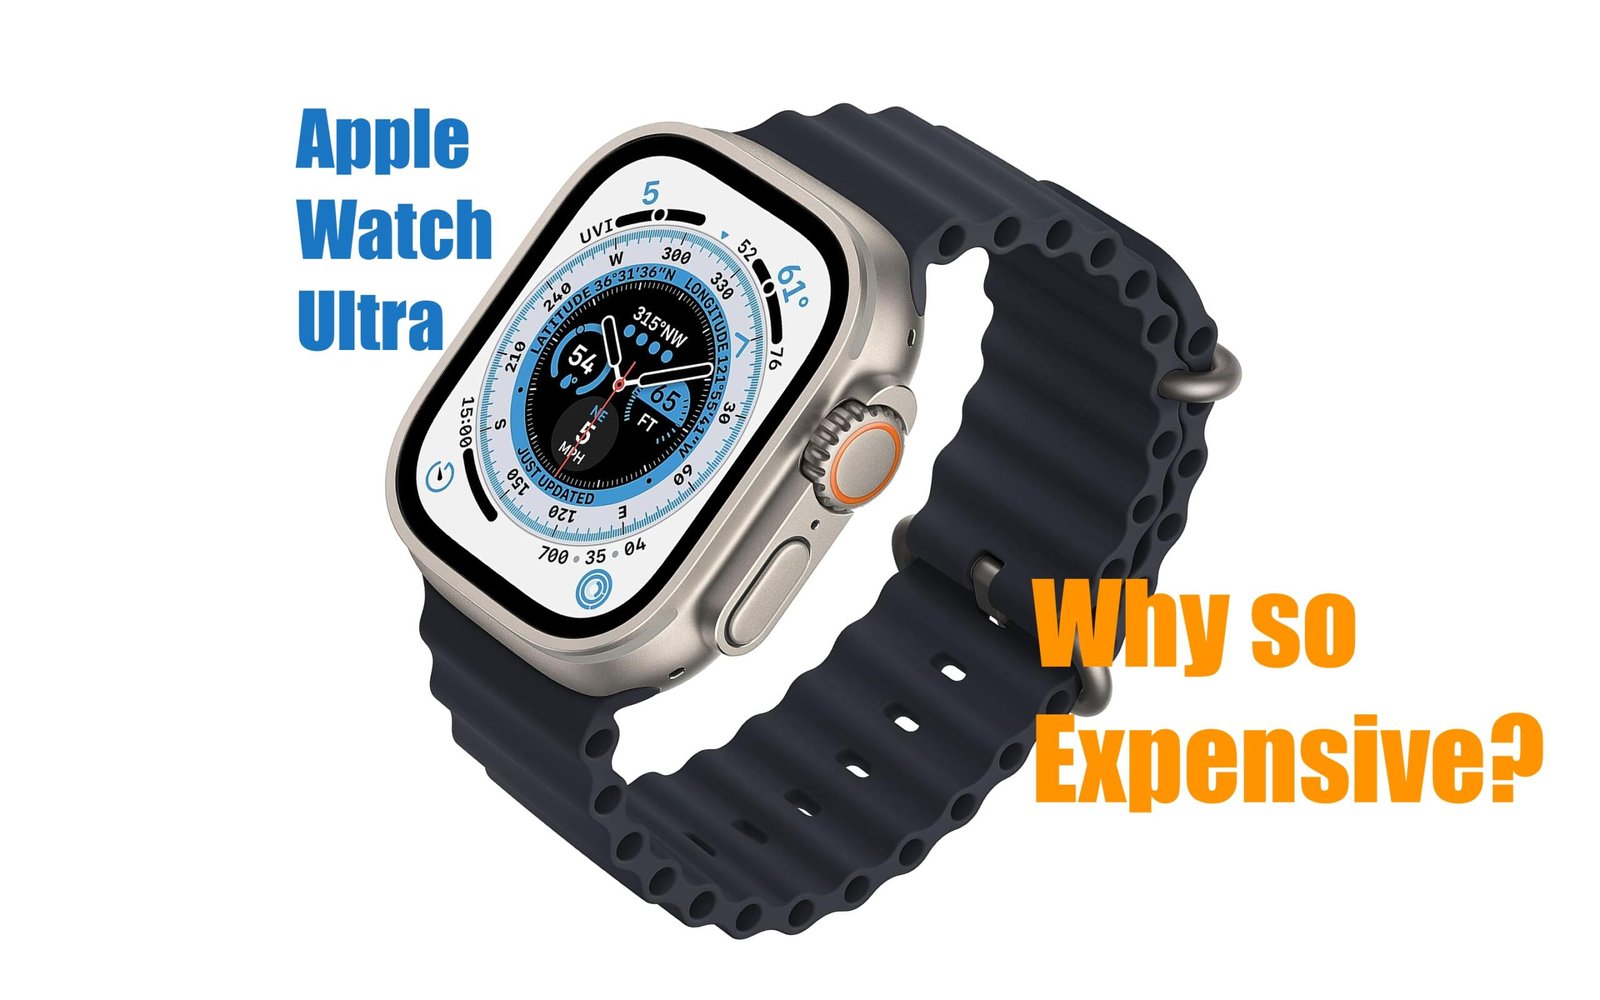 Apple_watch_ultra-expensive